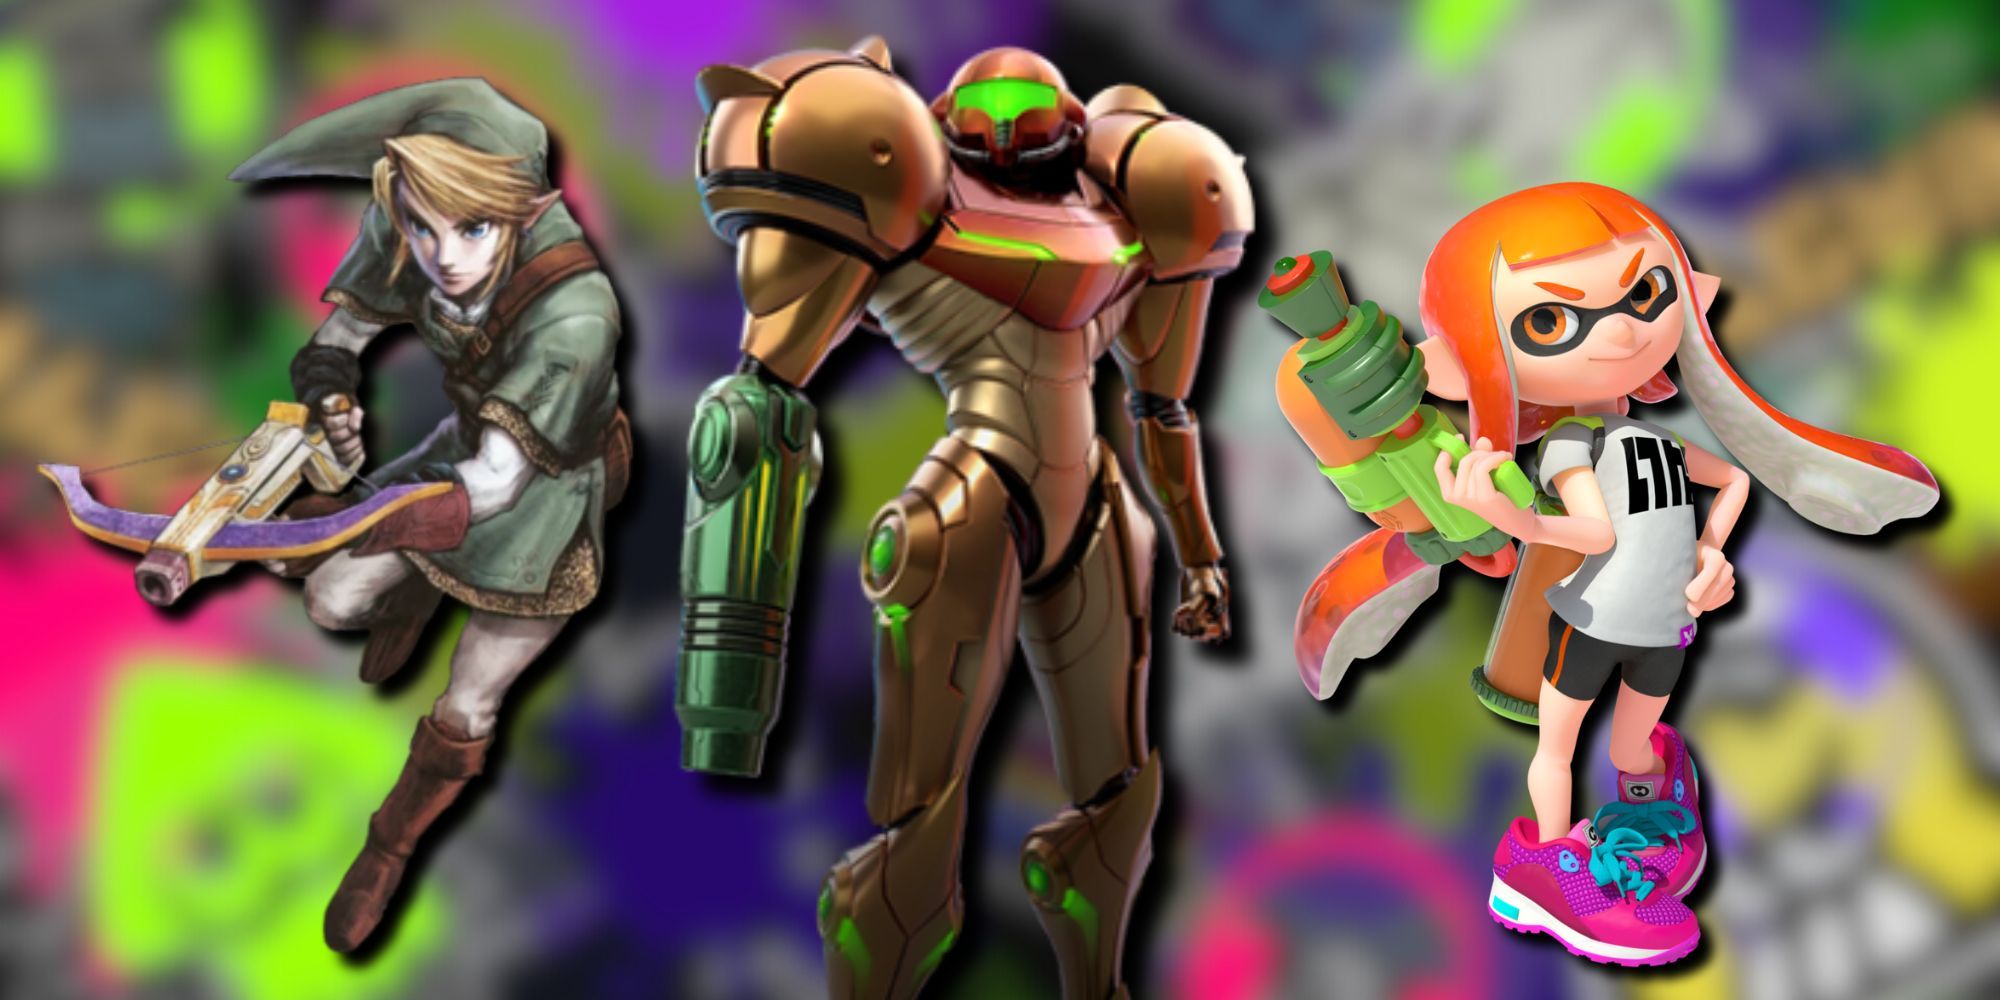 A collage of some of Nintendo's best shooter games: Link's Crossbow Training, Metroid Prime and Splatoon.